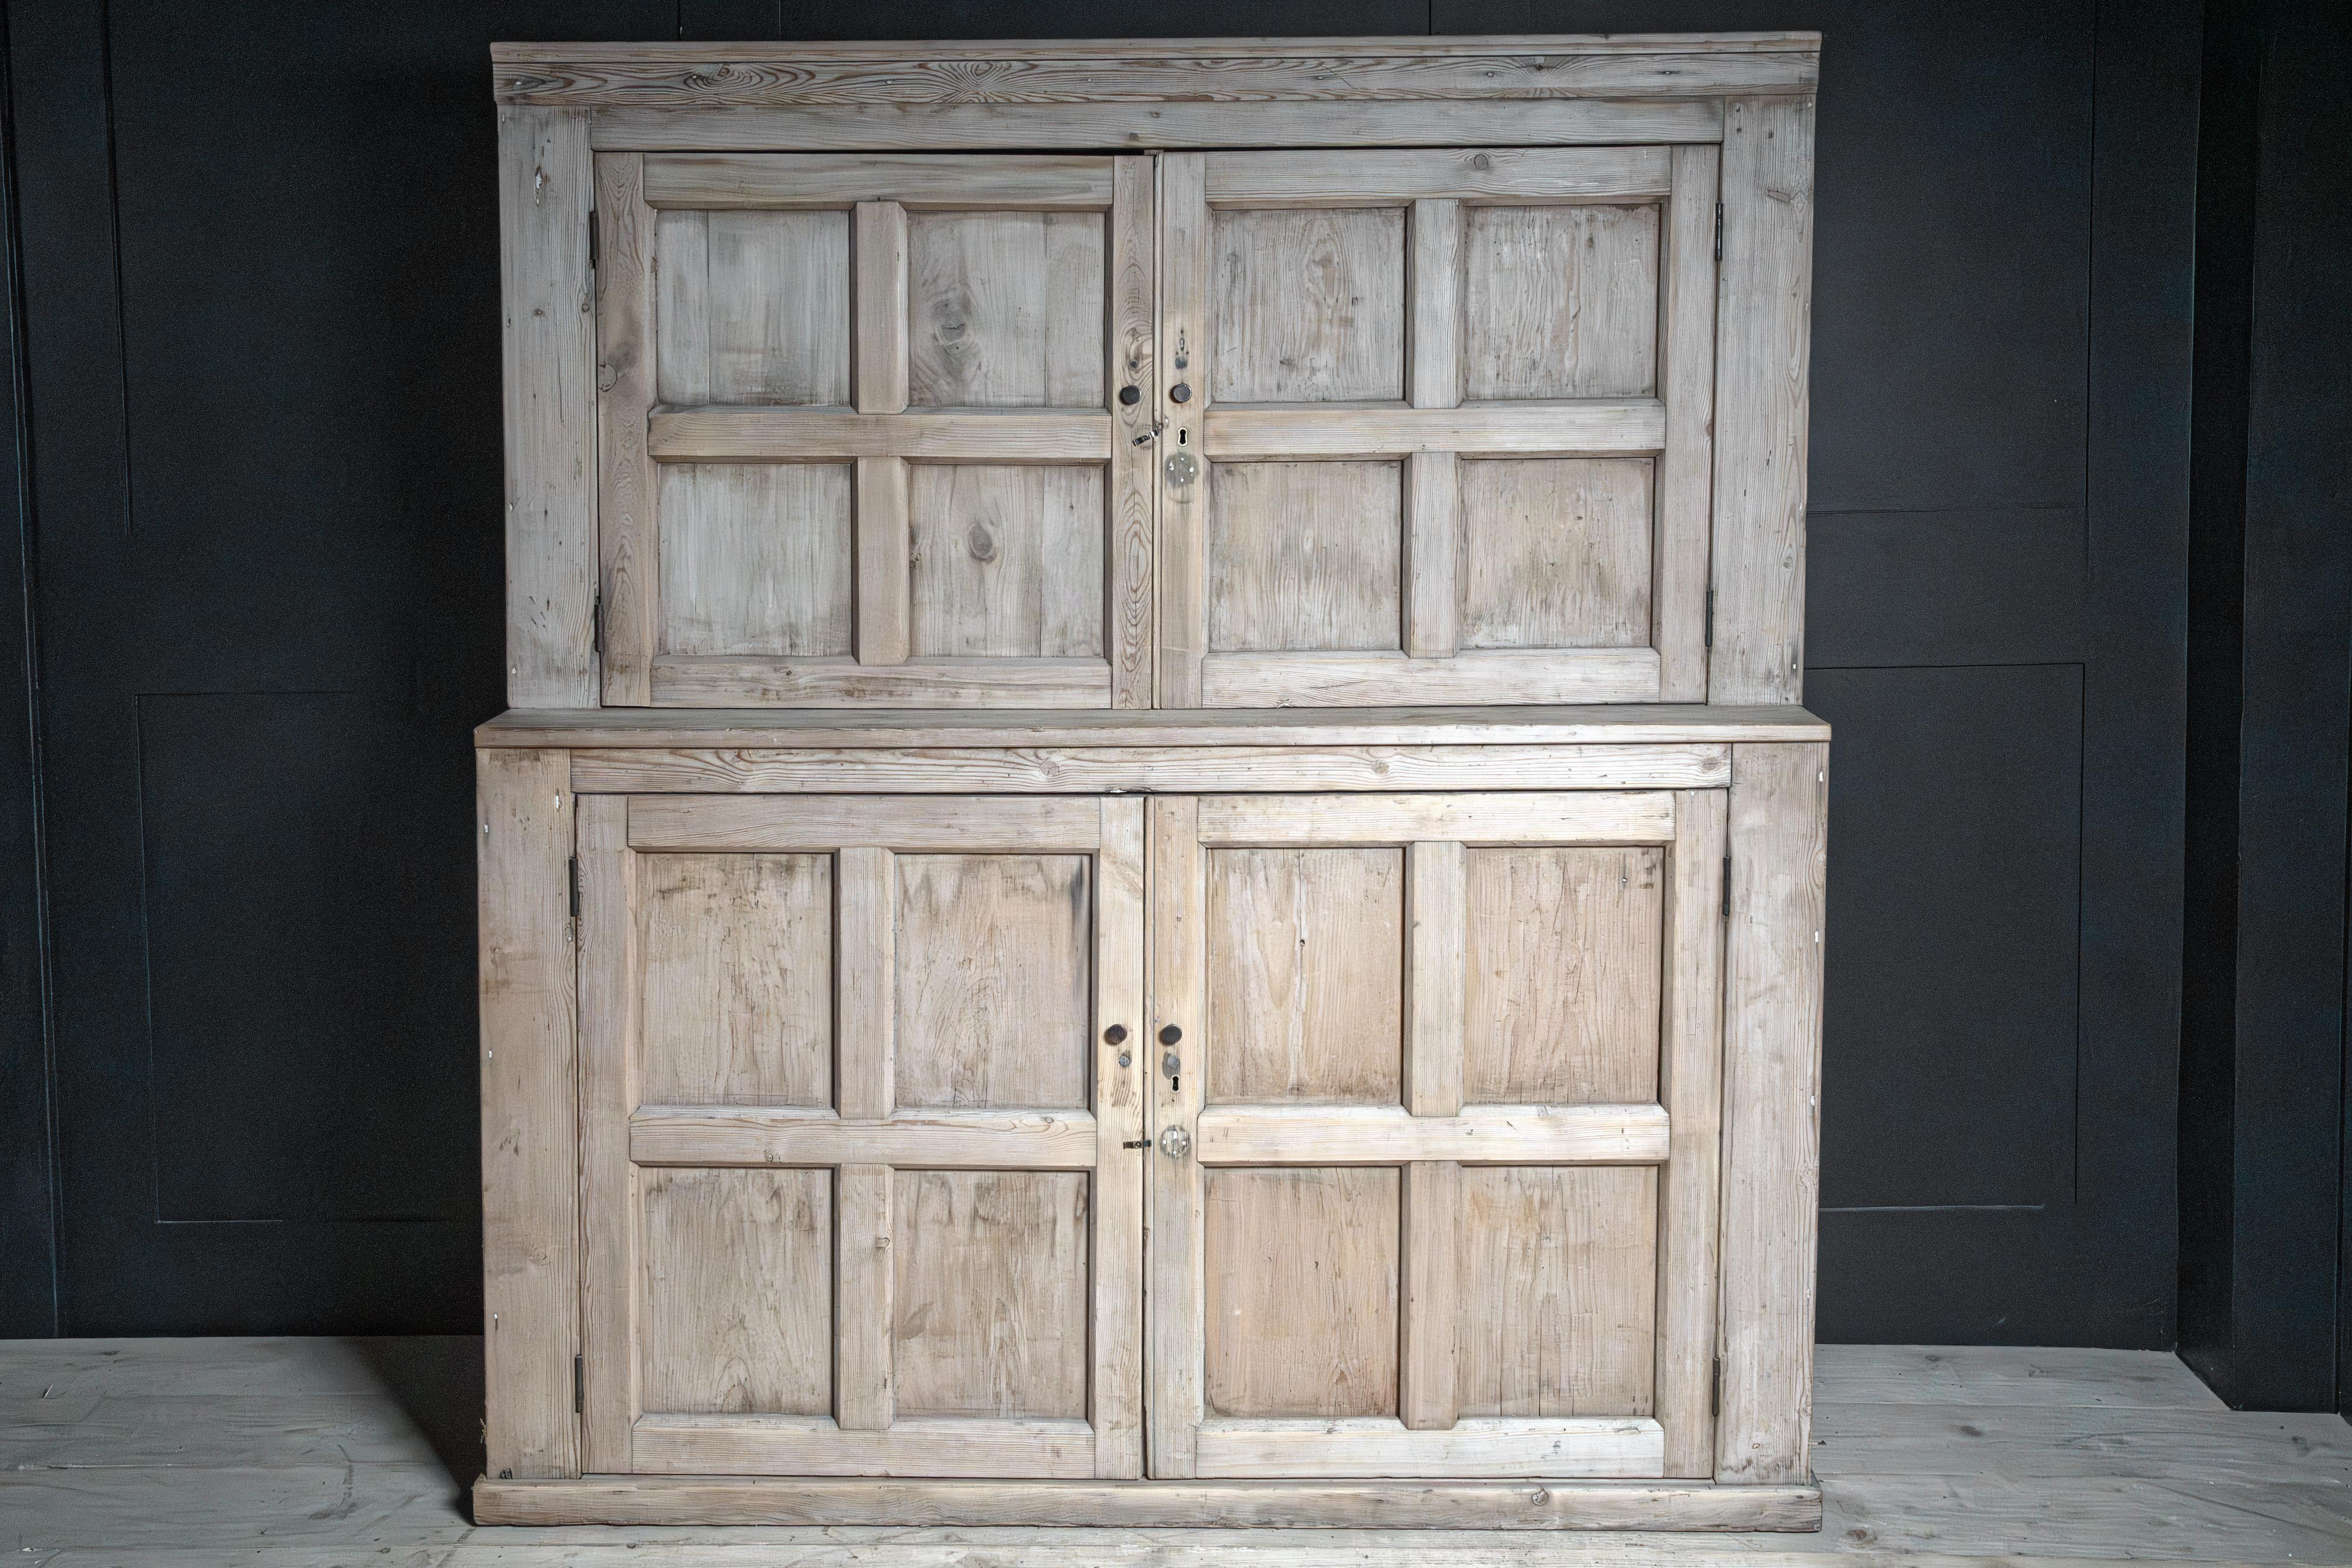 Lutyens arts and crafts English housekeepers cabinet silvered Pitch Pine Late 19th century Circa 1890 vintage antique kingham alton hampshire UK for sale